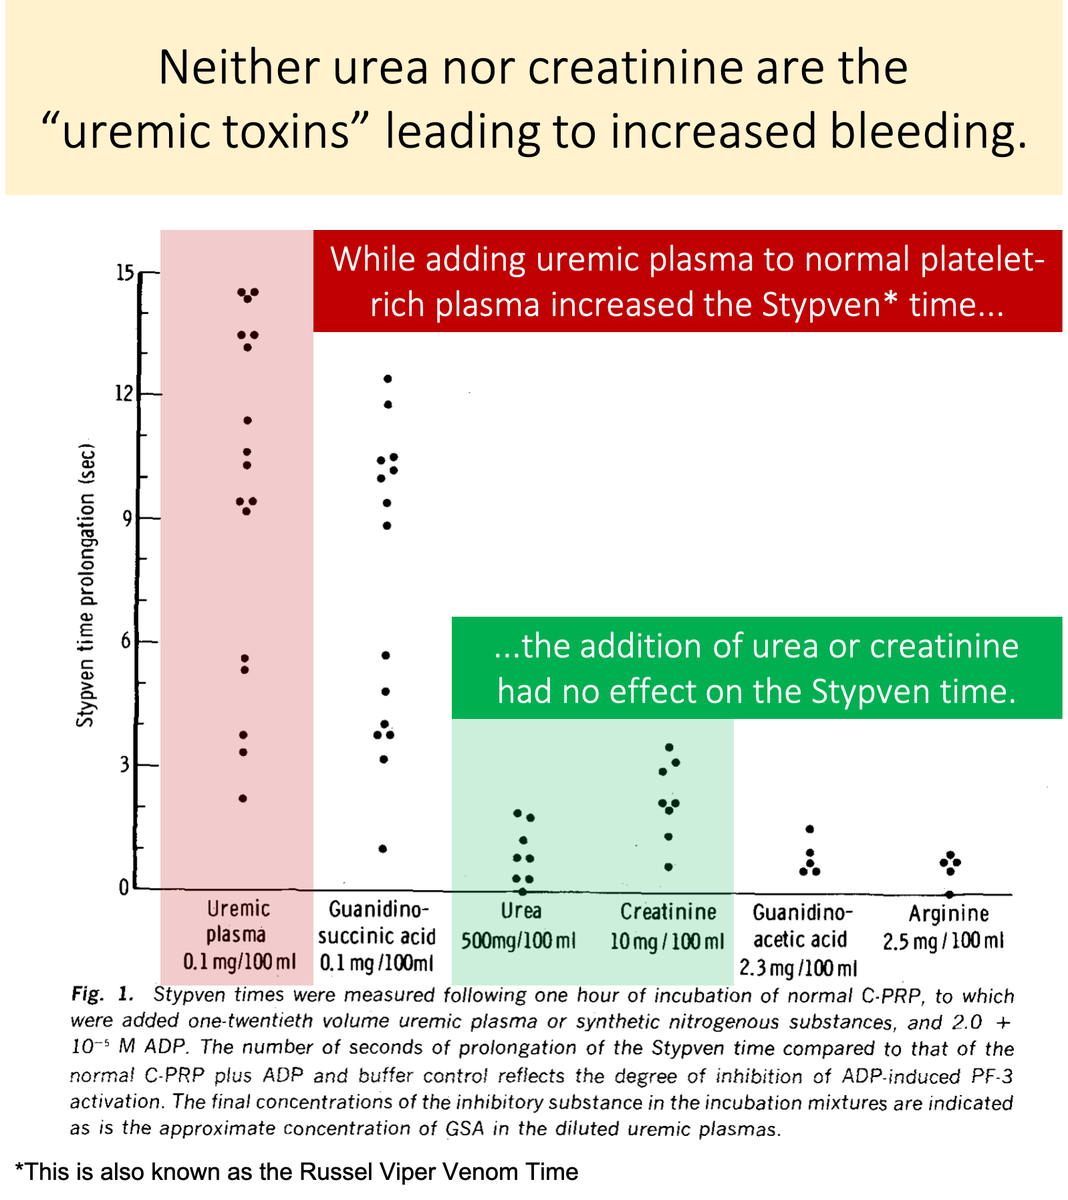 5/Neither urea nor creatinine cause uremic platelets.In one study their addition to normal platelet-rich plasma had no effect on platelet function.The toxin is something other than urea or creatinine! https://pubmed.ncbi.nlm.nih.gov/5455565/ 